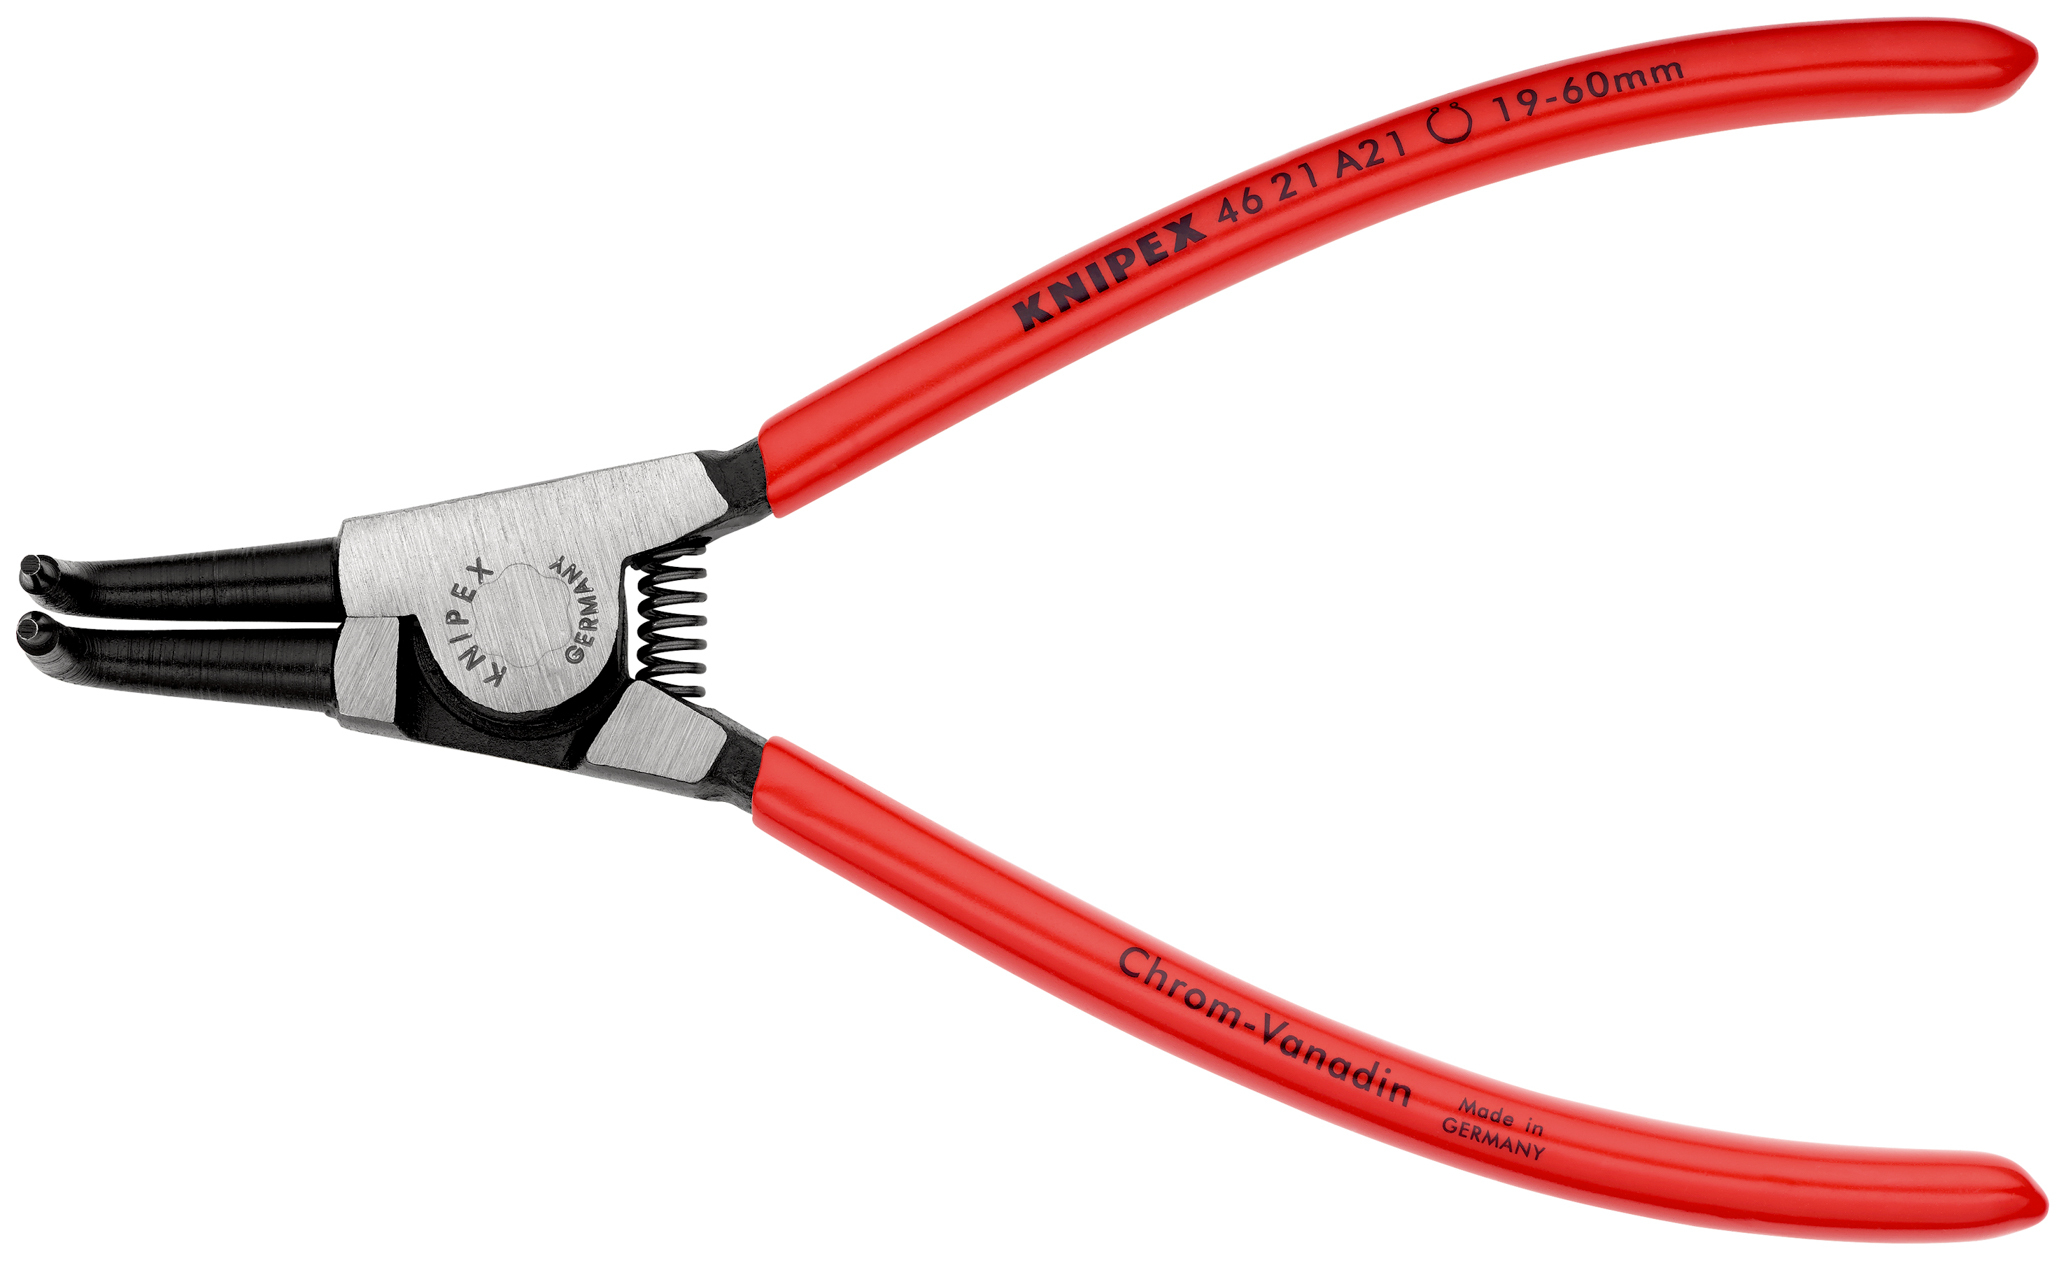 Pince 170mm circlips ext. 19-60mm 90° KNIPEX - 46 21 A21